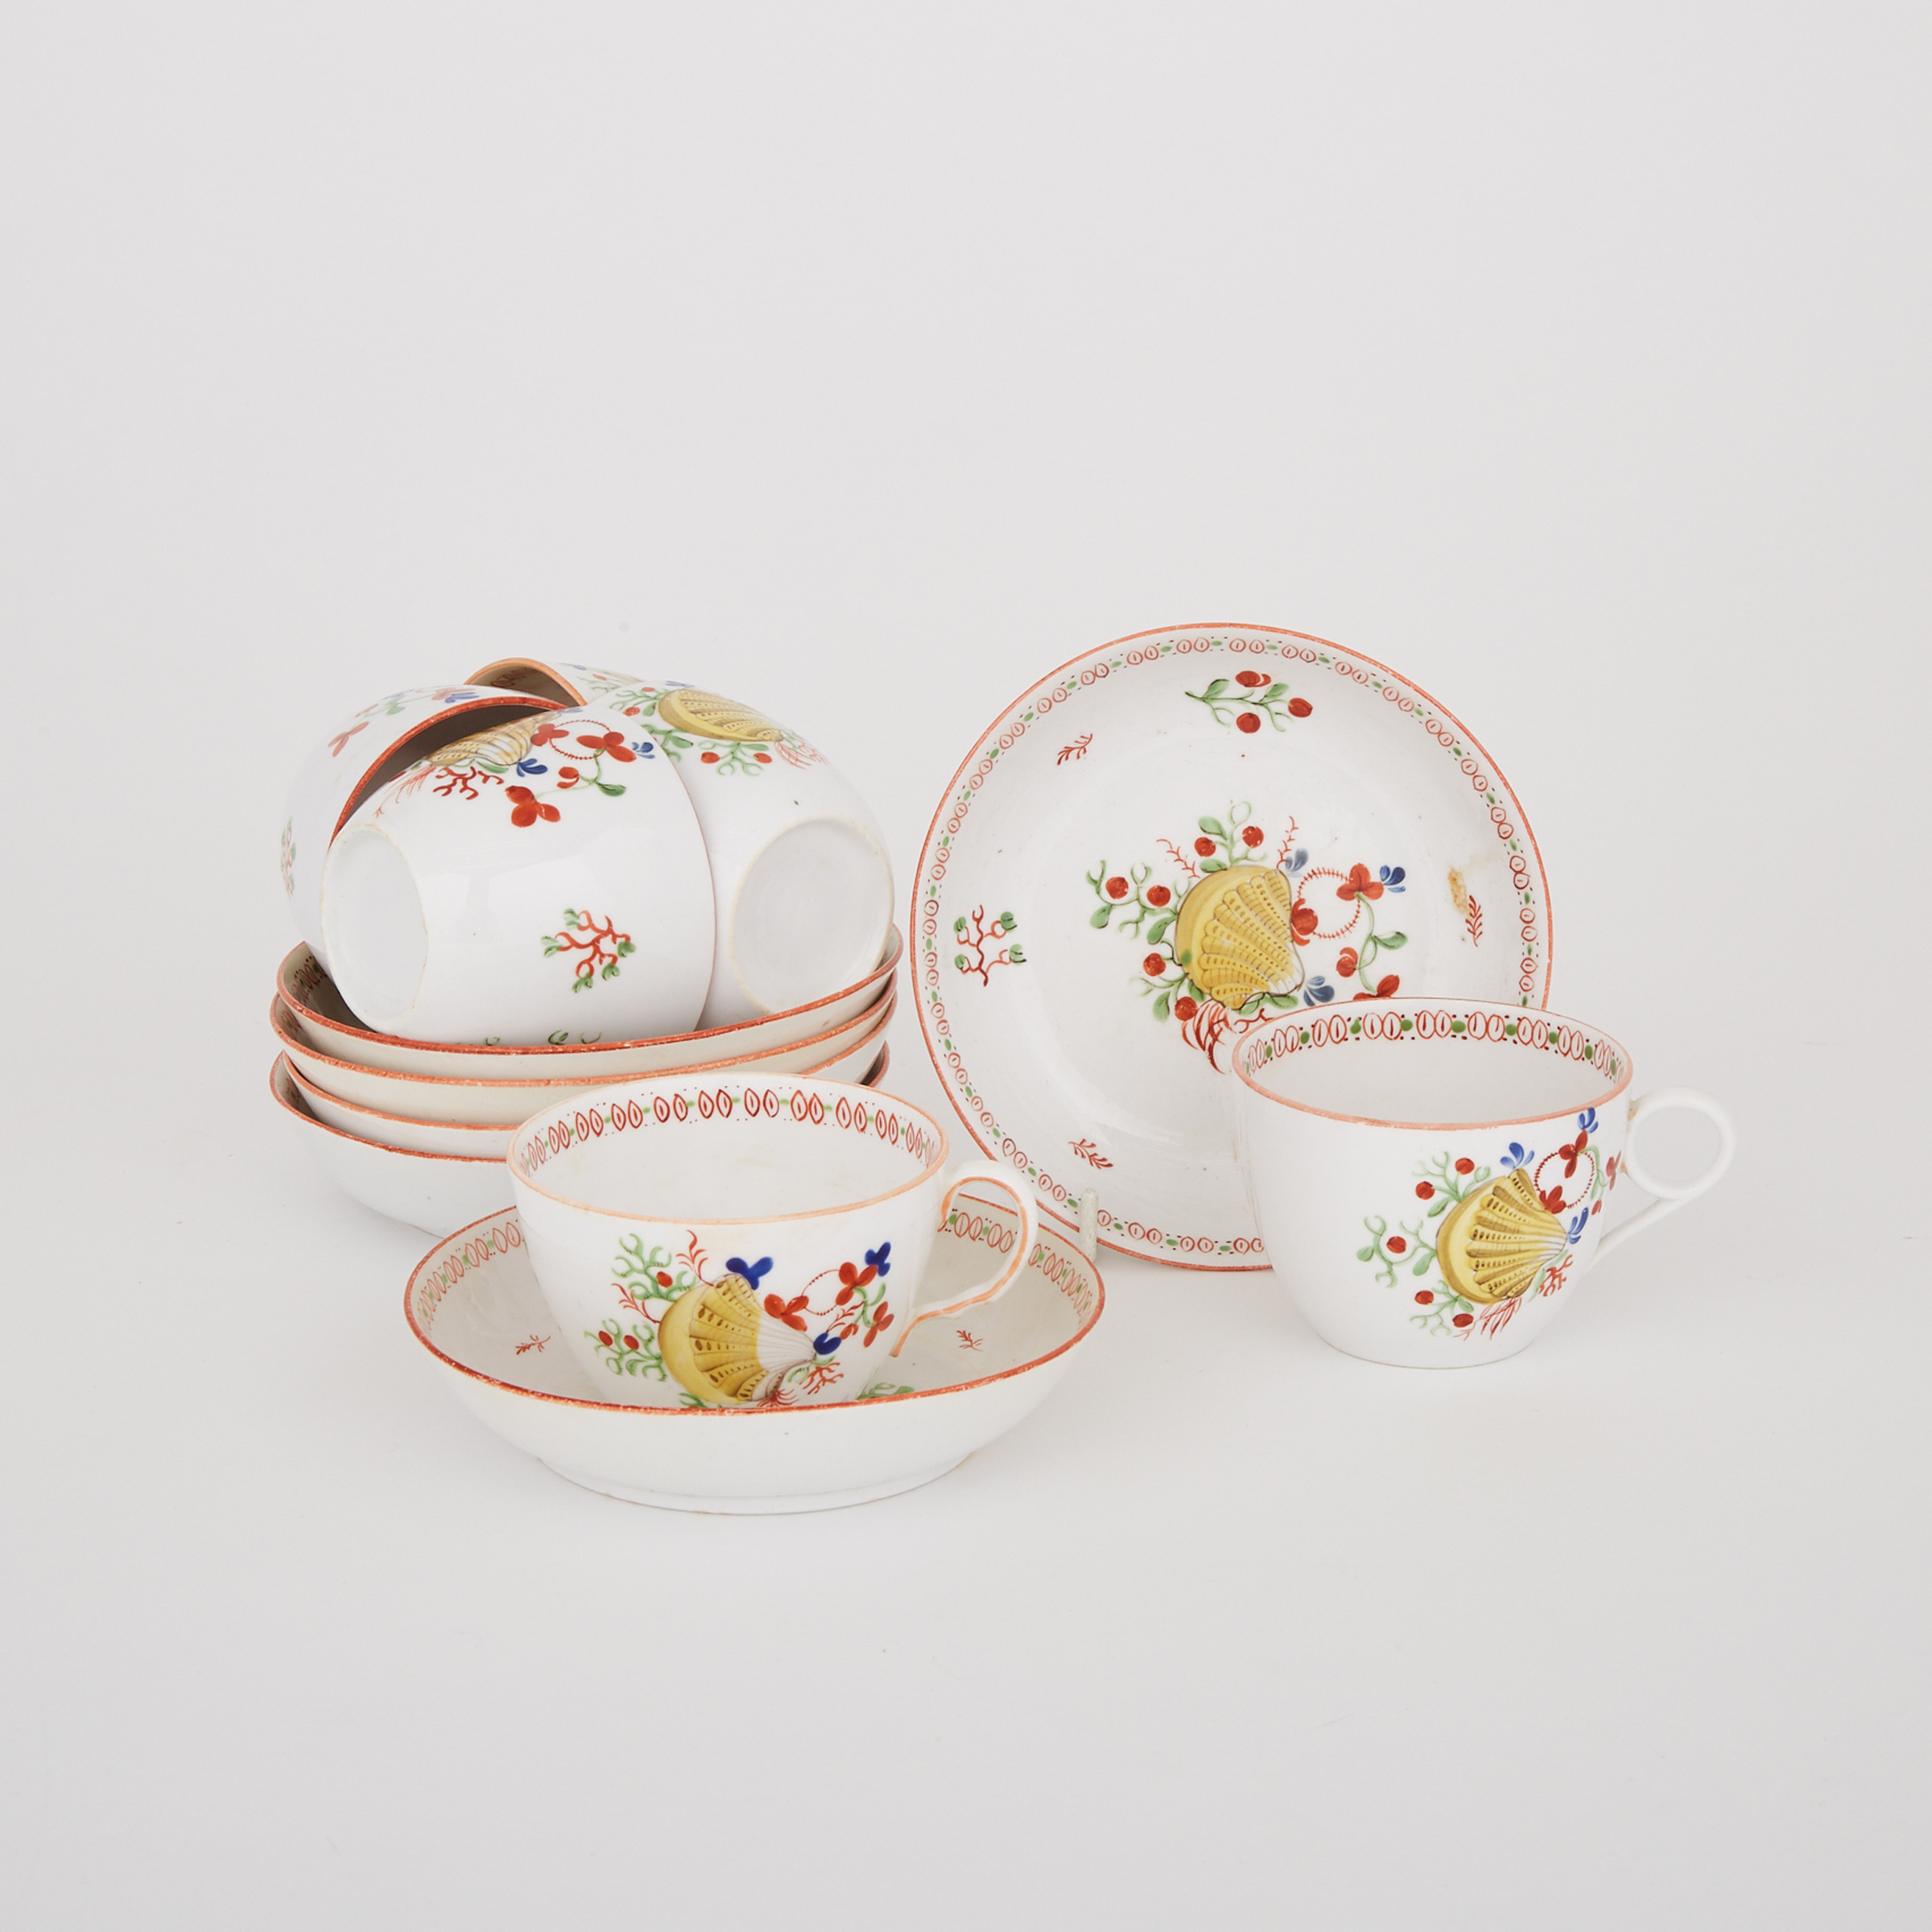 Six English Porcelain ‘Yellow Shell’ Pattern Cups and Saucers, c.1810